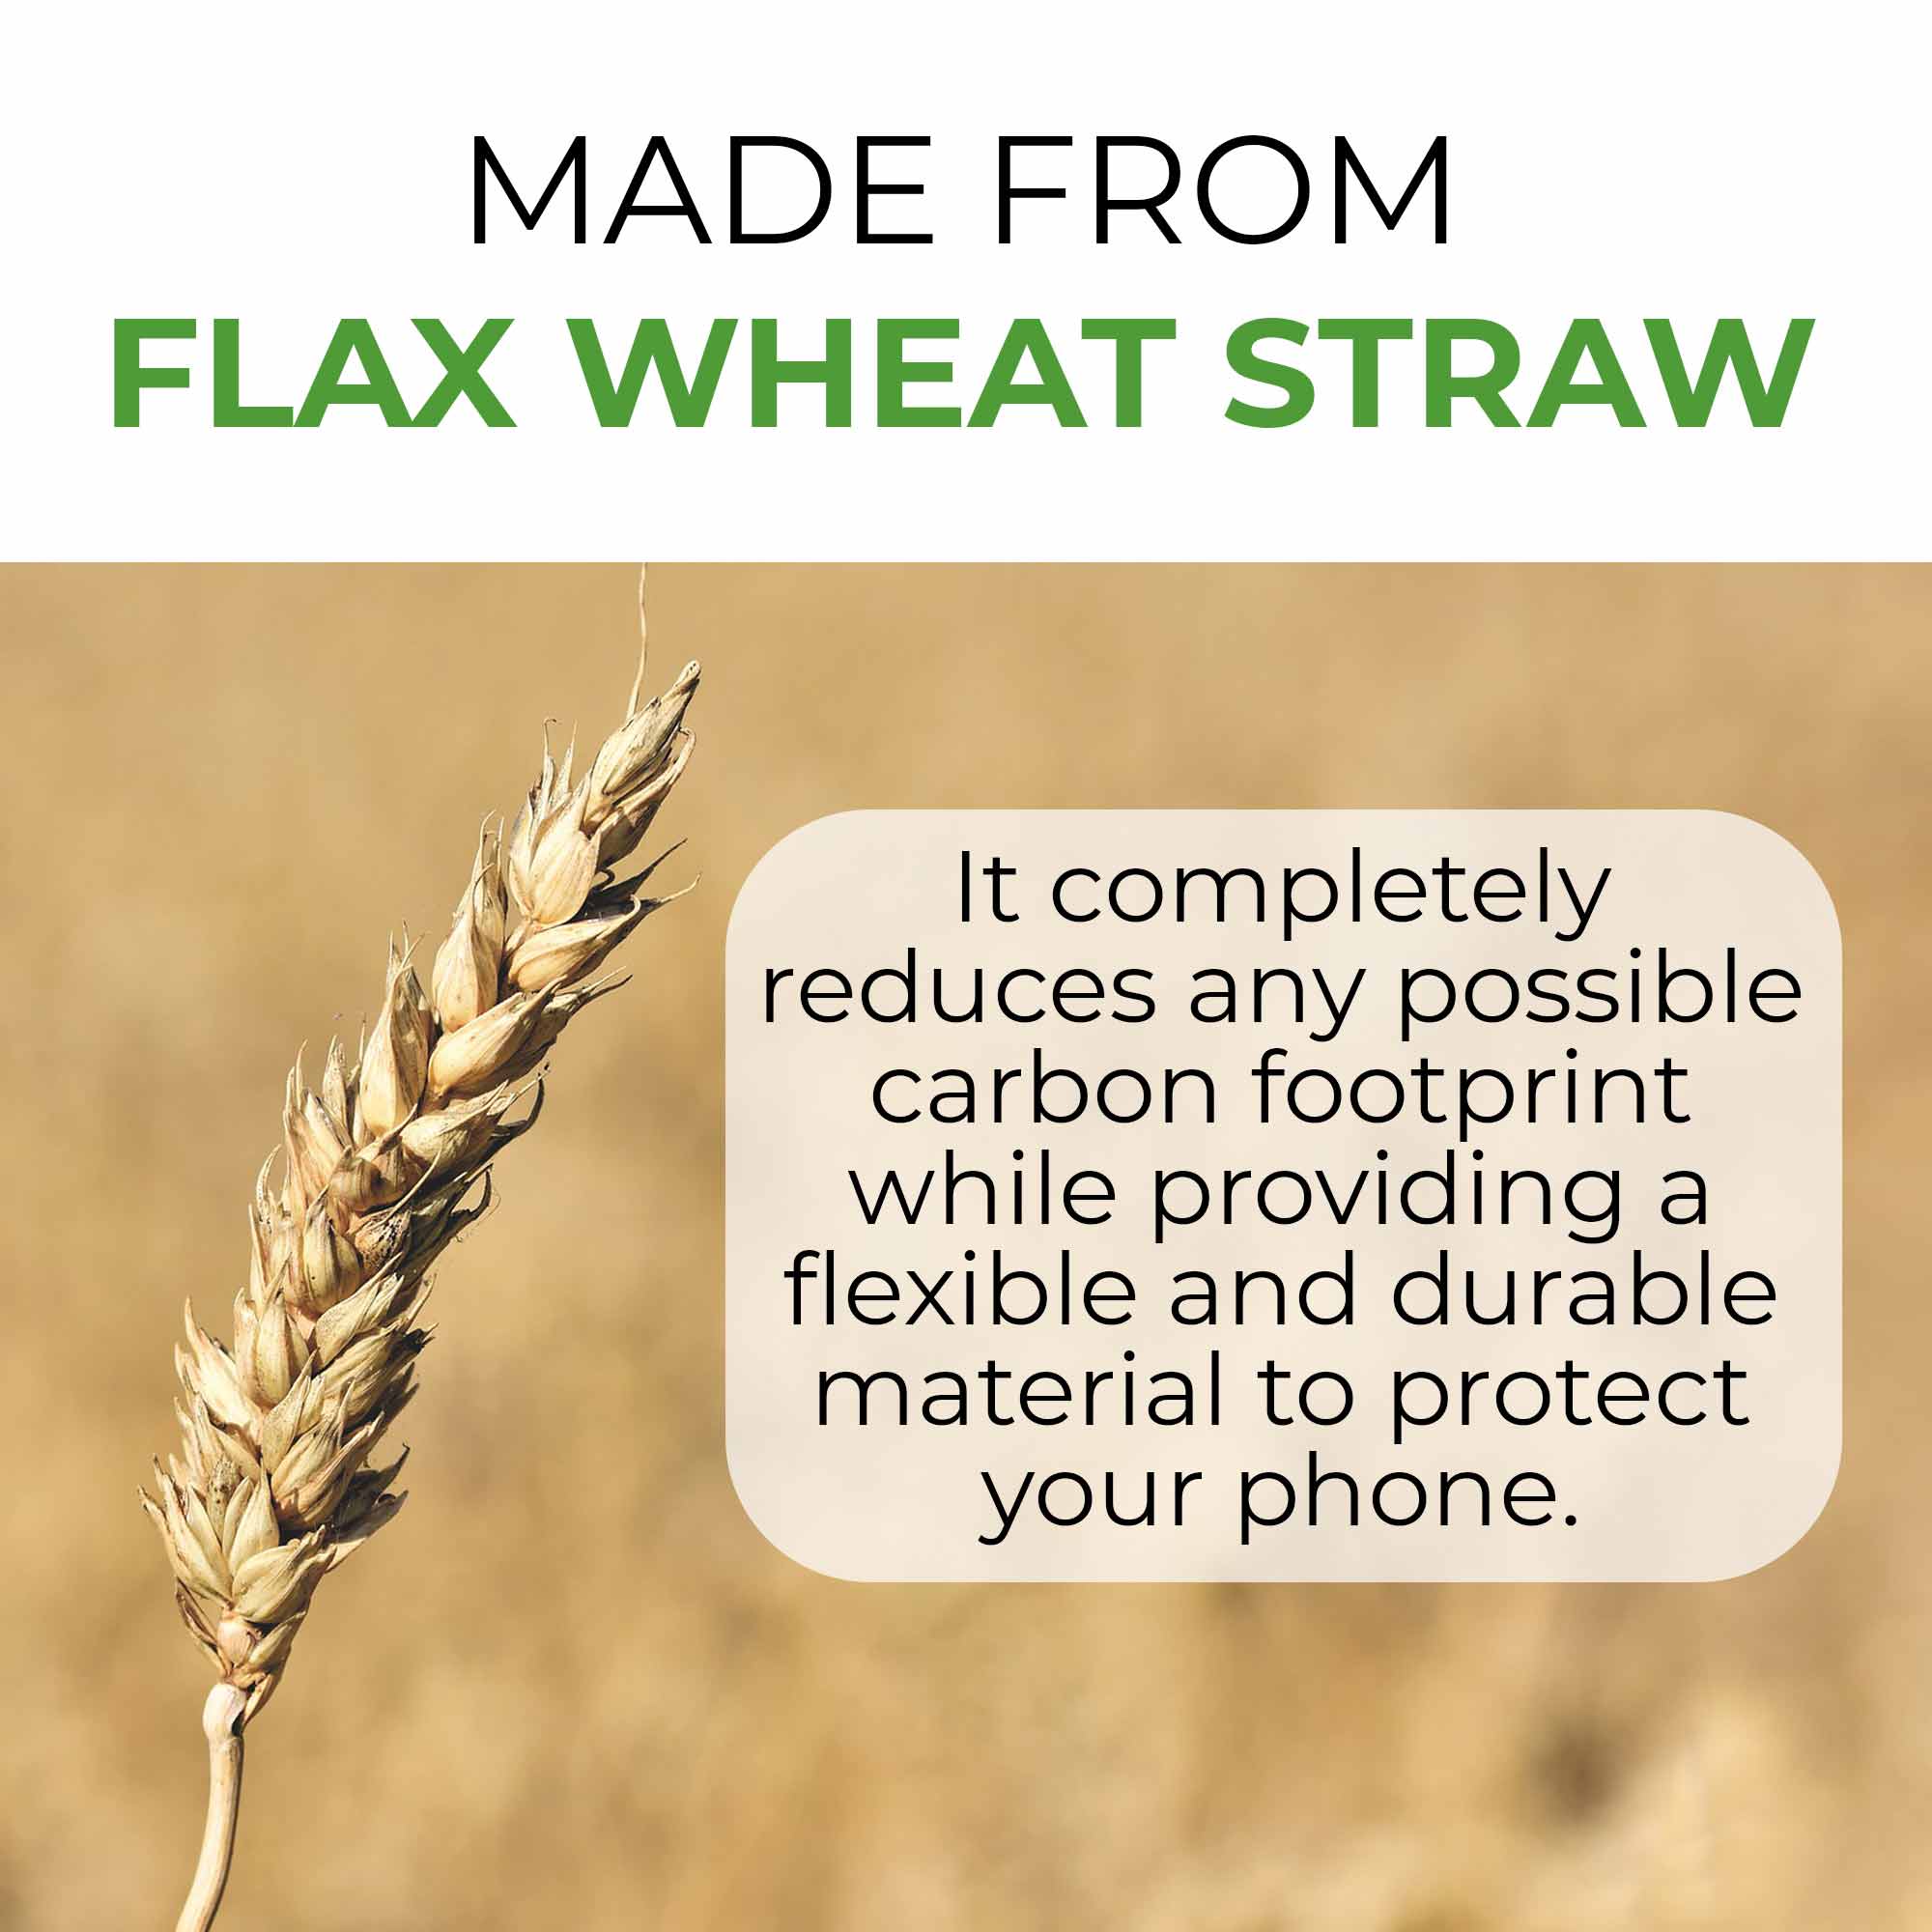 Made out of Sustainably Harvested Wheat